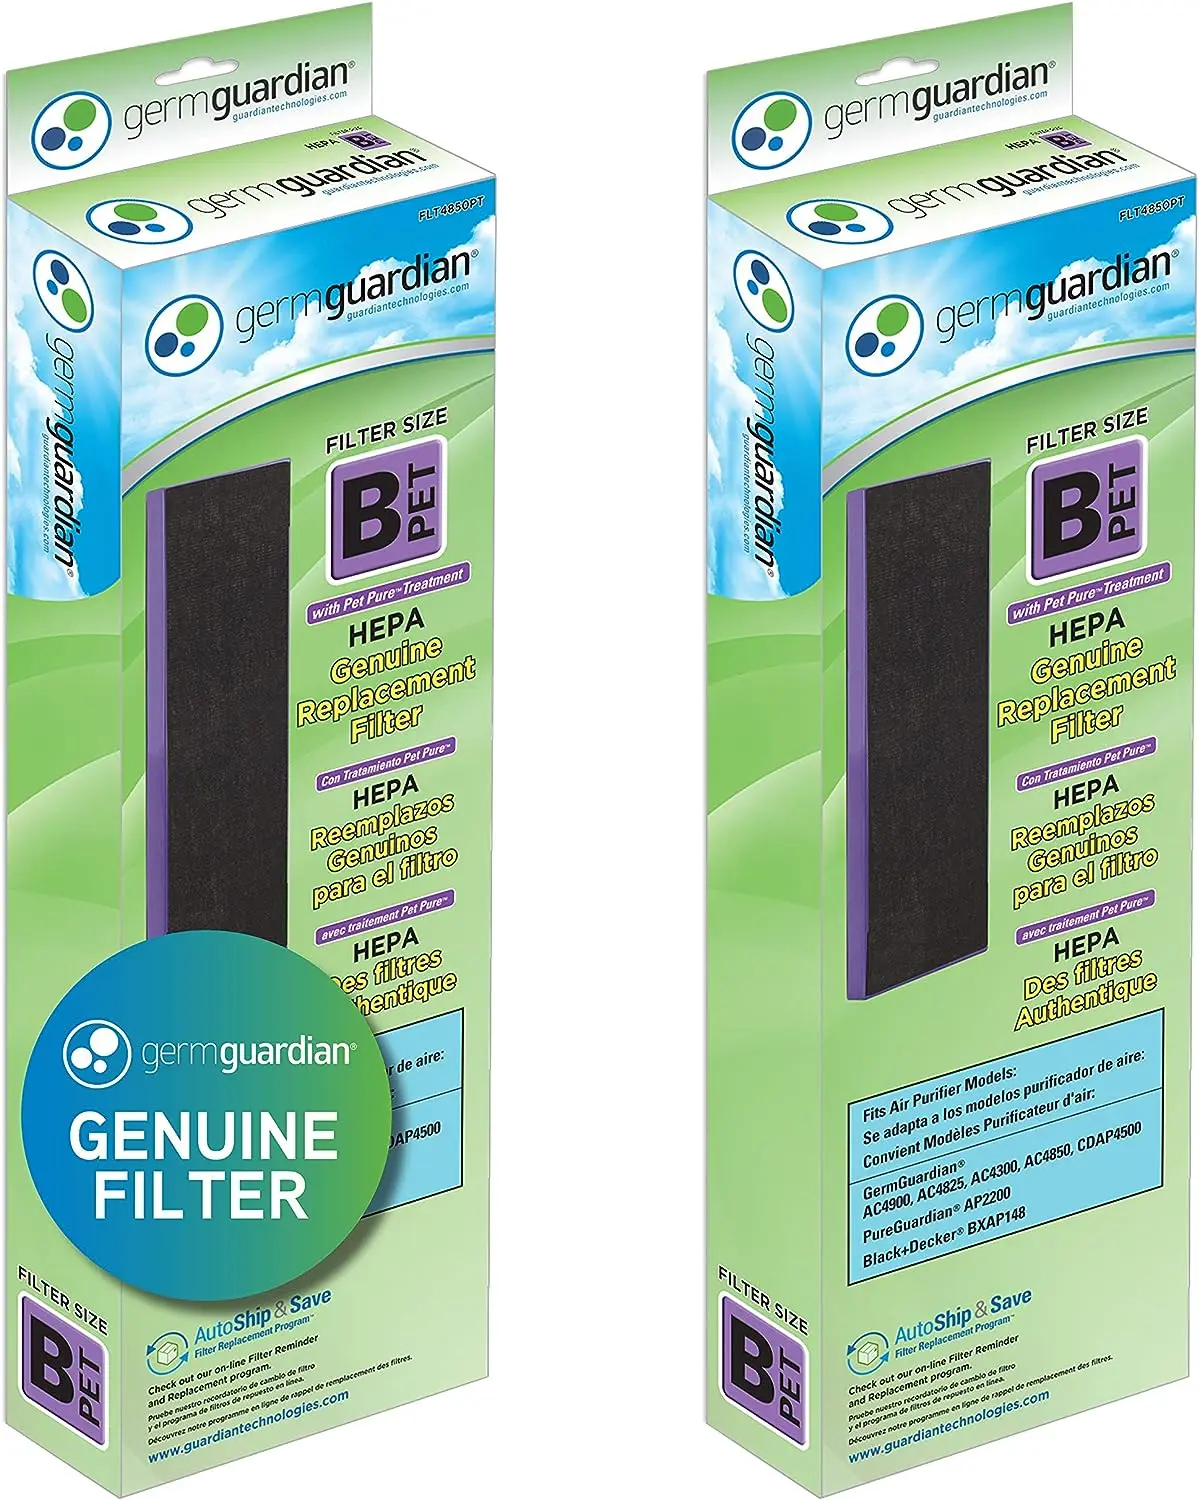 

Purifier Filter FLT4850PT Genuine True HEPA with Pet Pure Treatment Replacement Filter B Pet for AC4300/AC4800/4900 Series Air P